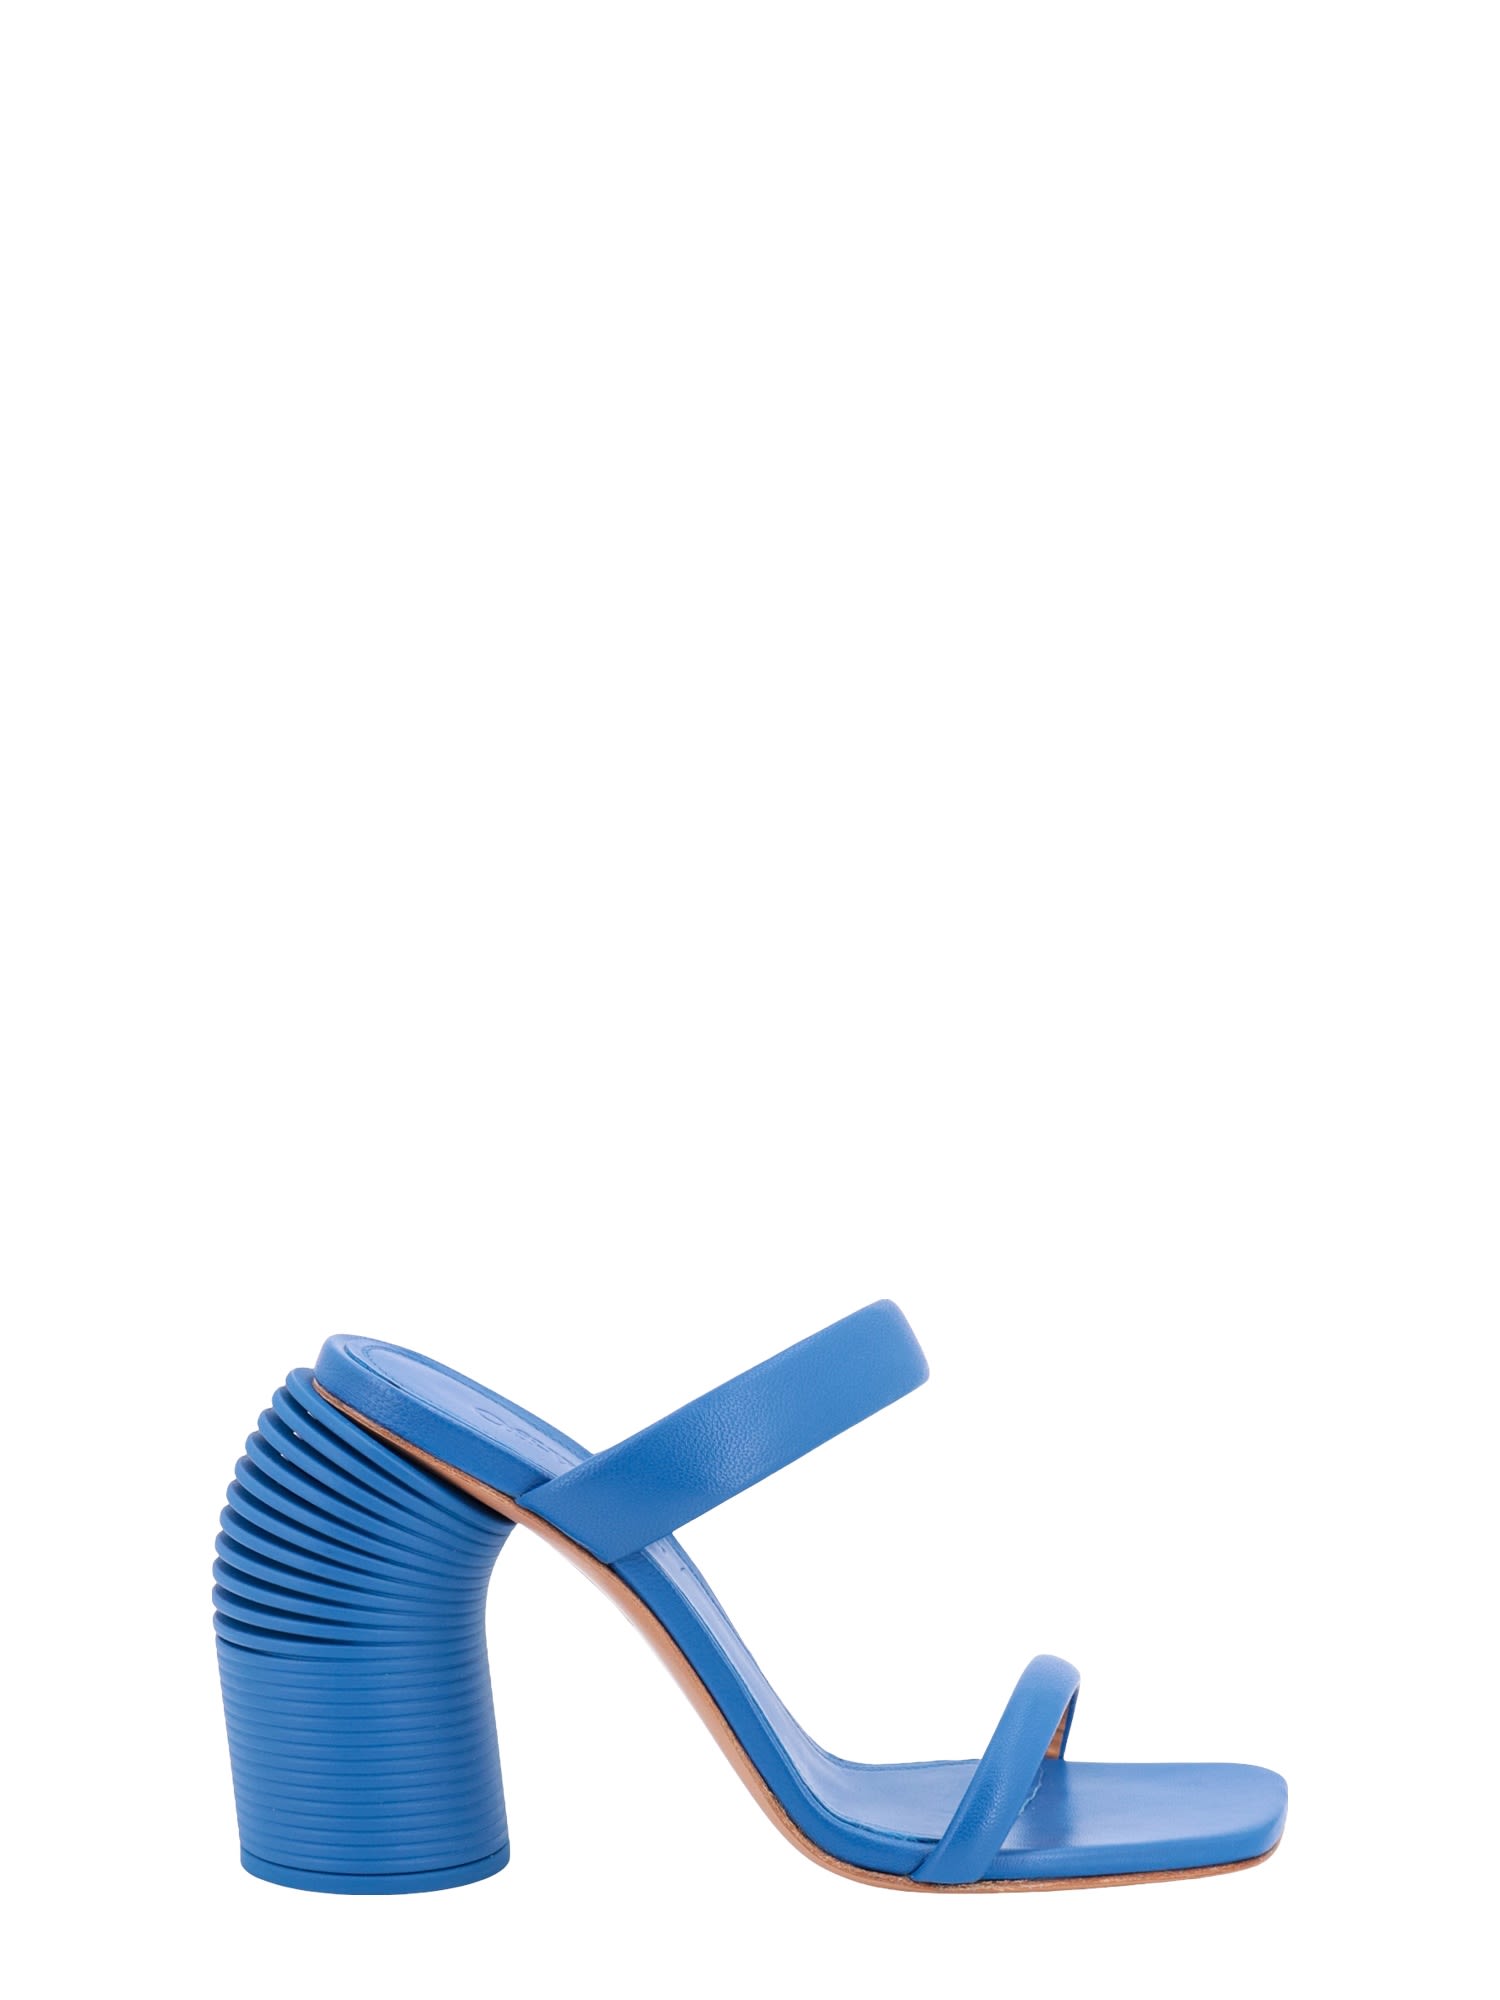 Off-white Tonal Spring Sandals In Blue